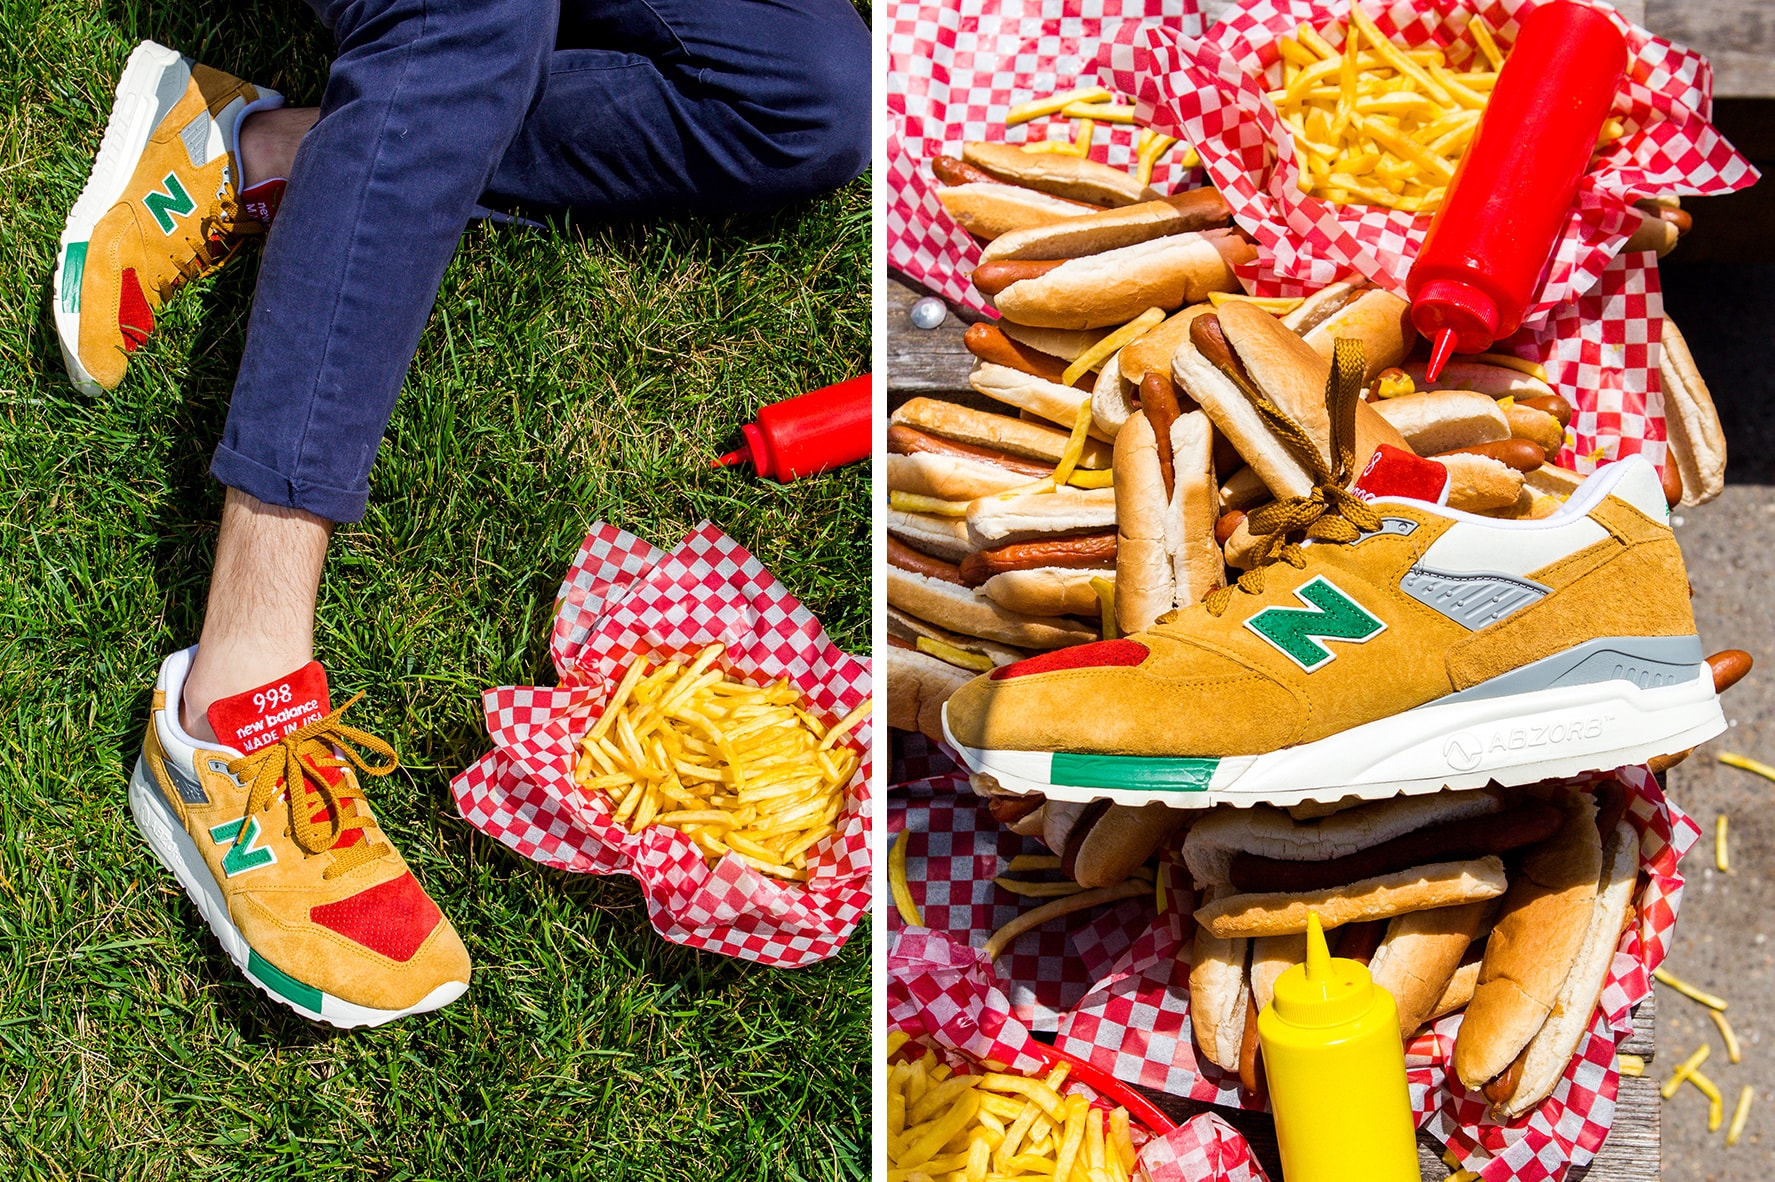 J. Crew New Balance 998 Ketchup Mustard Colorway red green pickle relish yellow hot dog 4th of july condiments July 12 special packaging